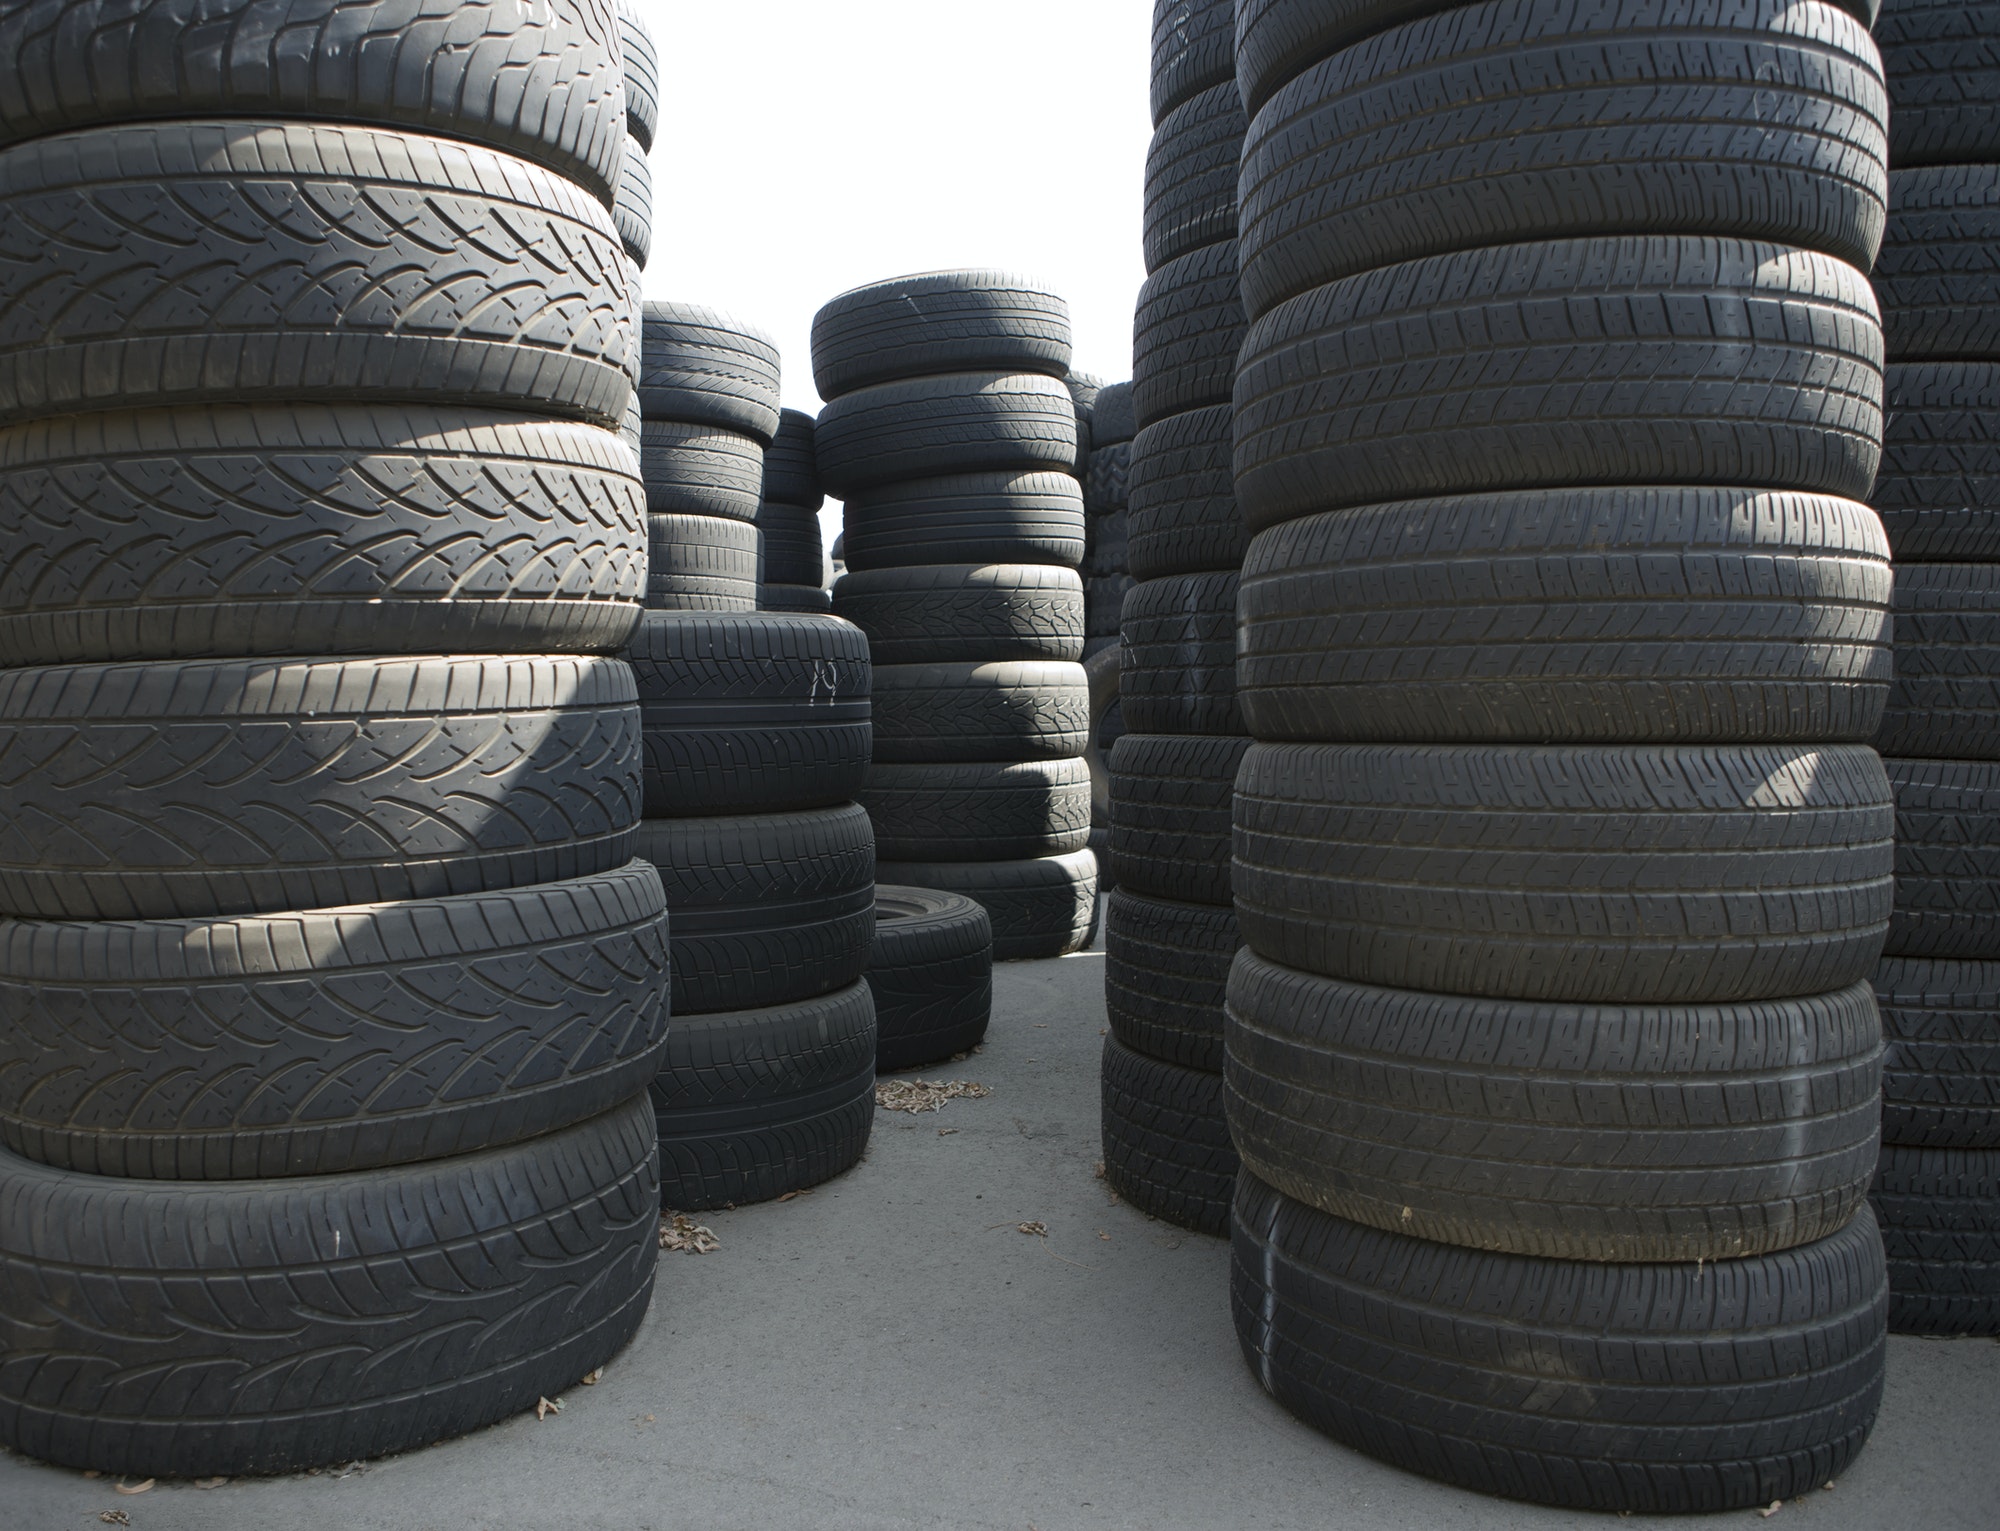 Stacks of Used Tires